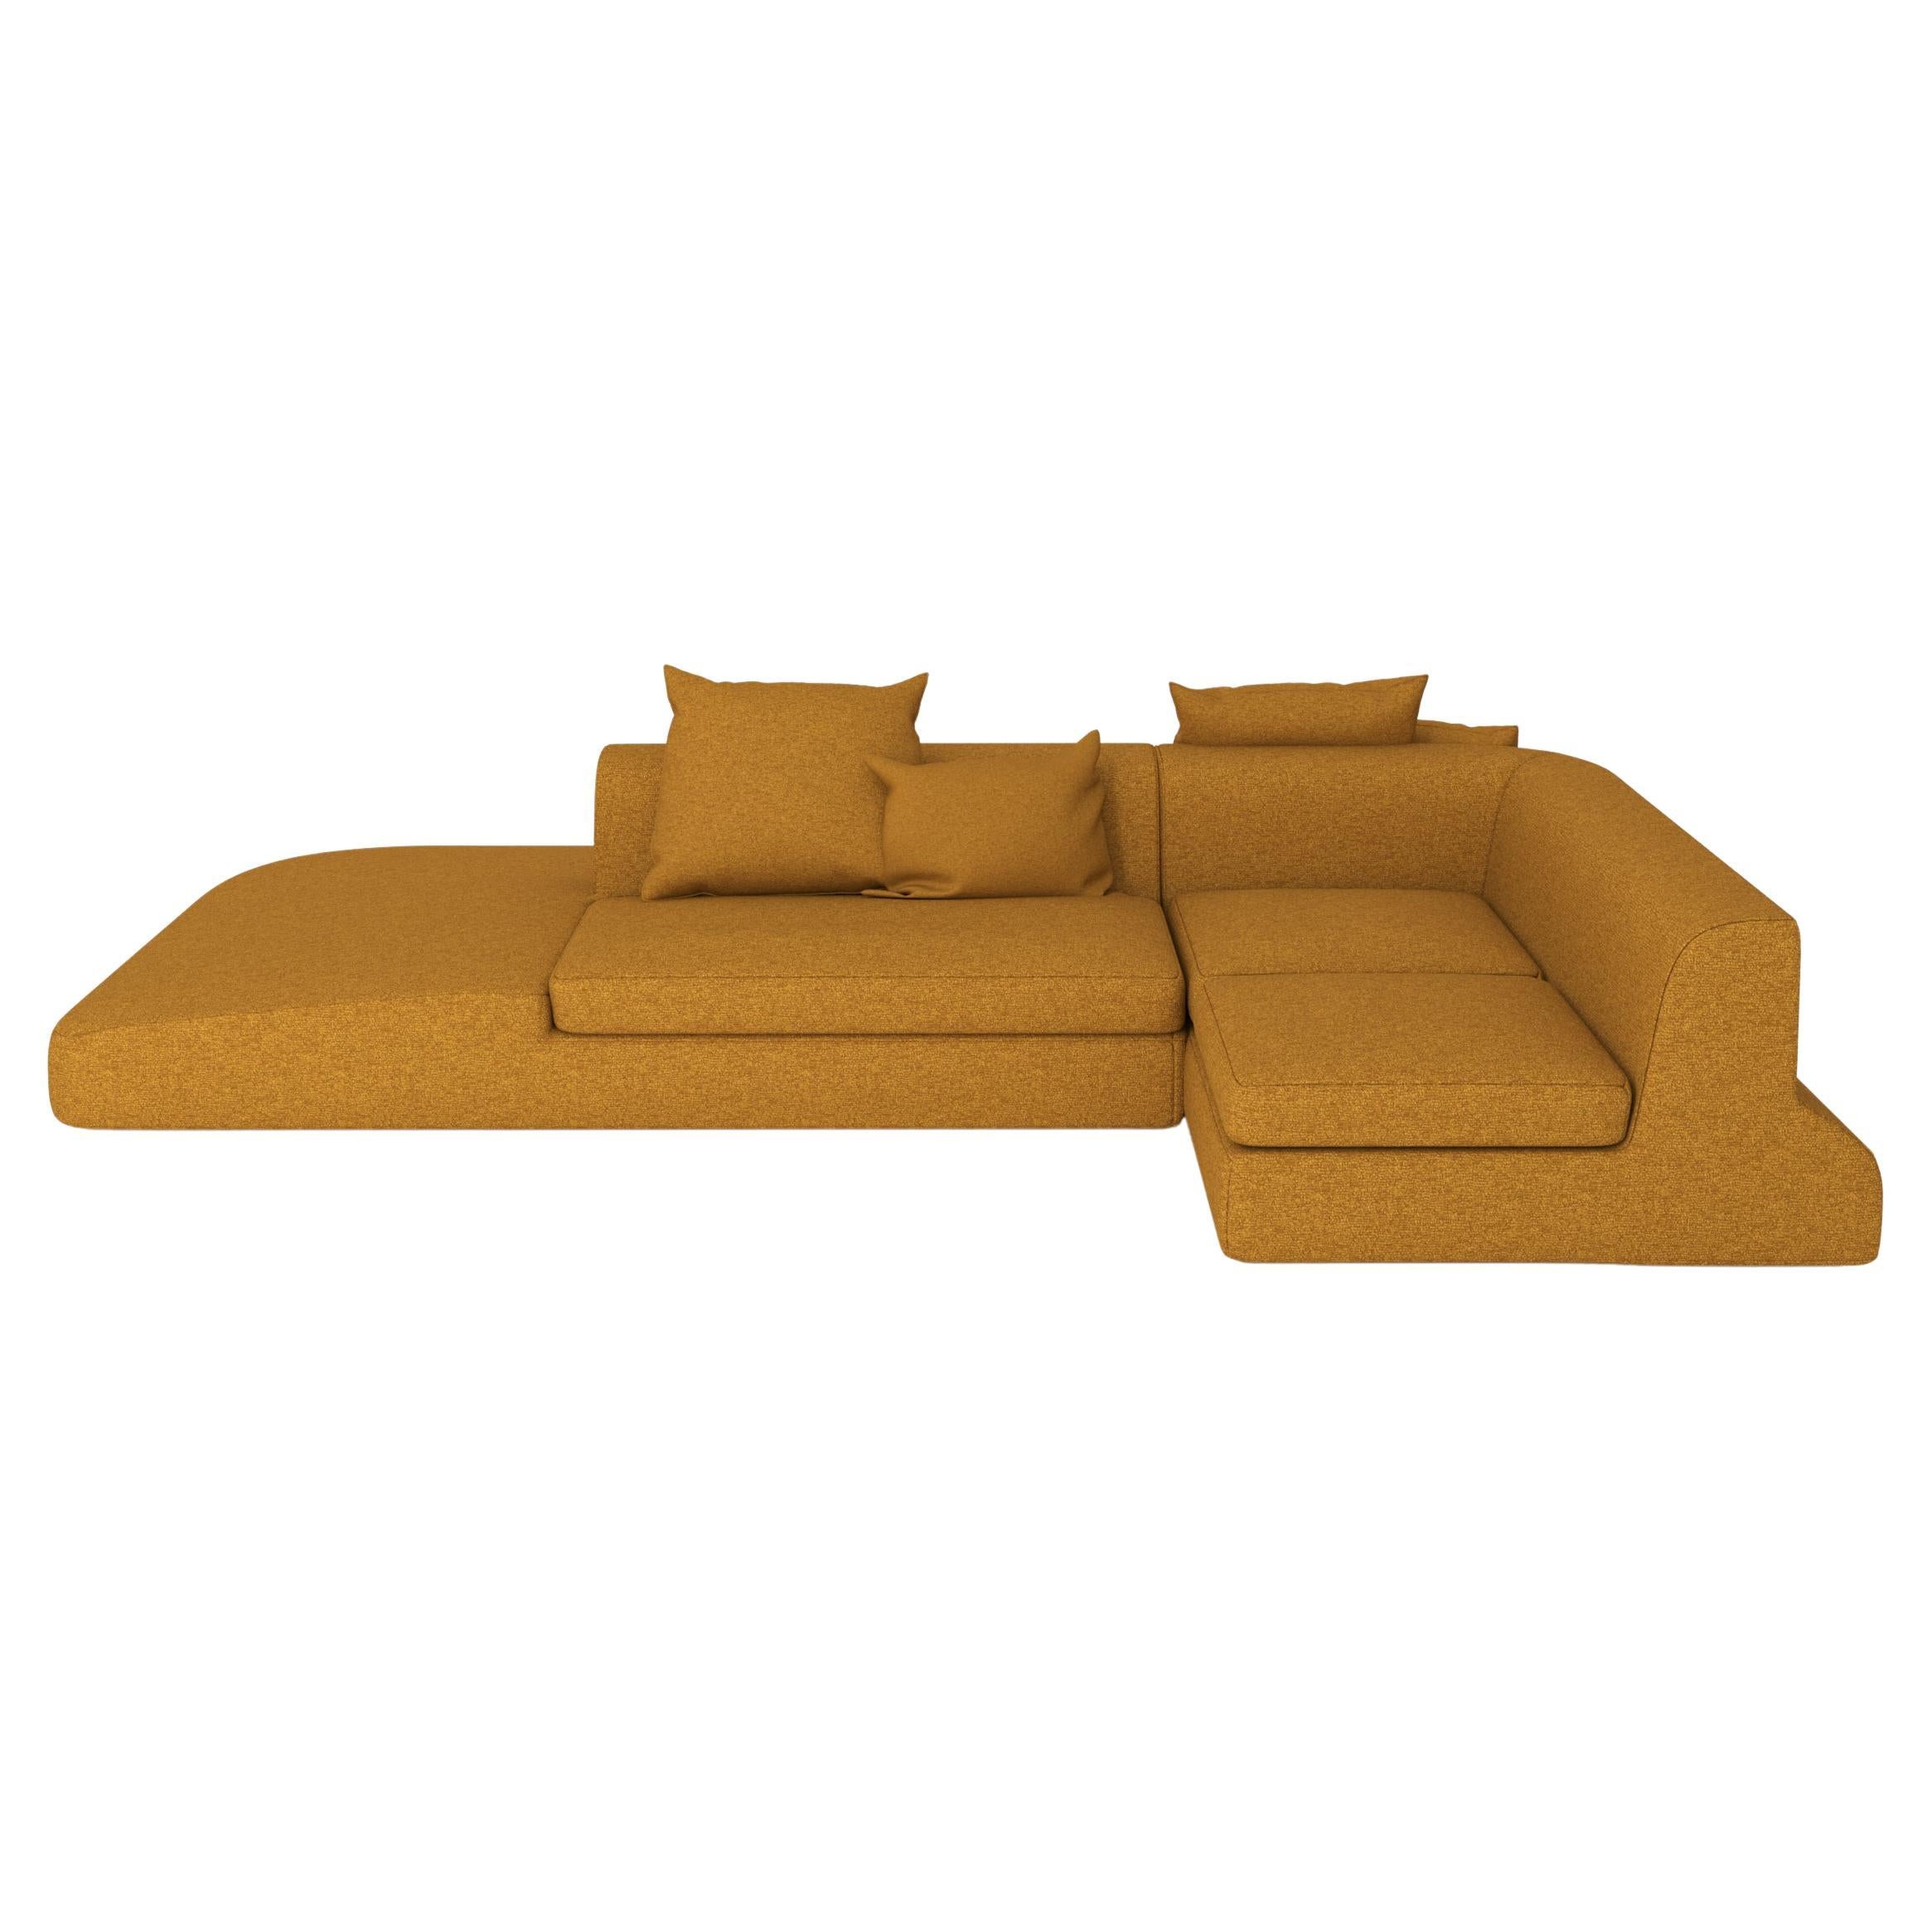 Yellow Ochre Modular Sofa Slope by Andrea Steidl for Delvis Unlimited For Sale